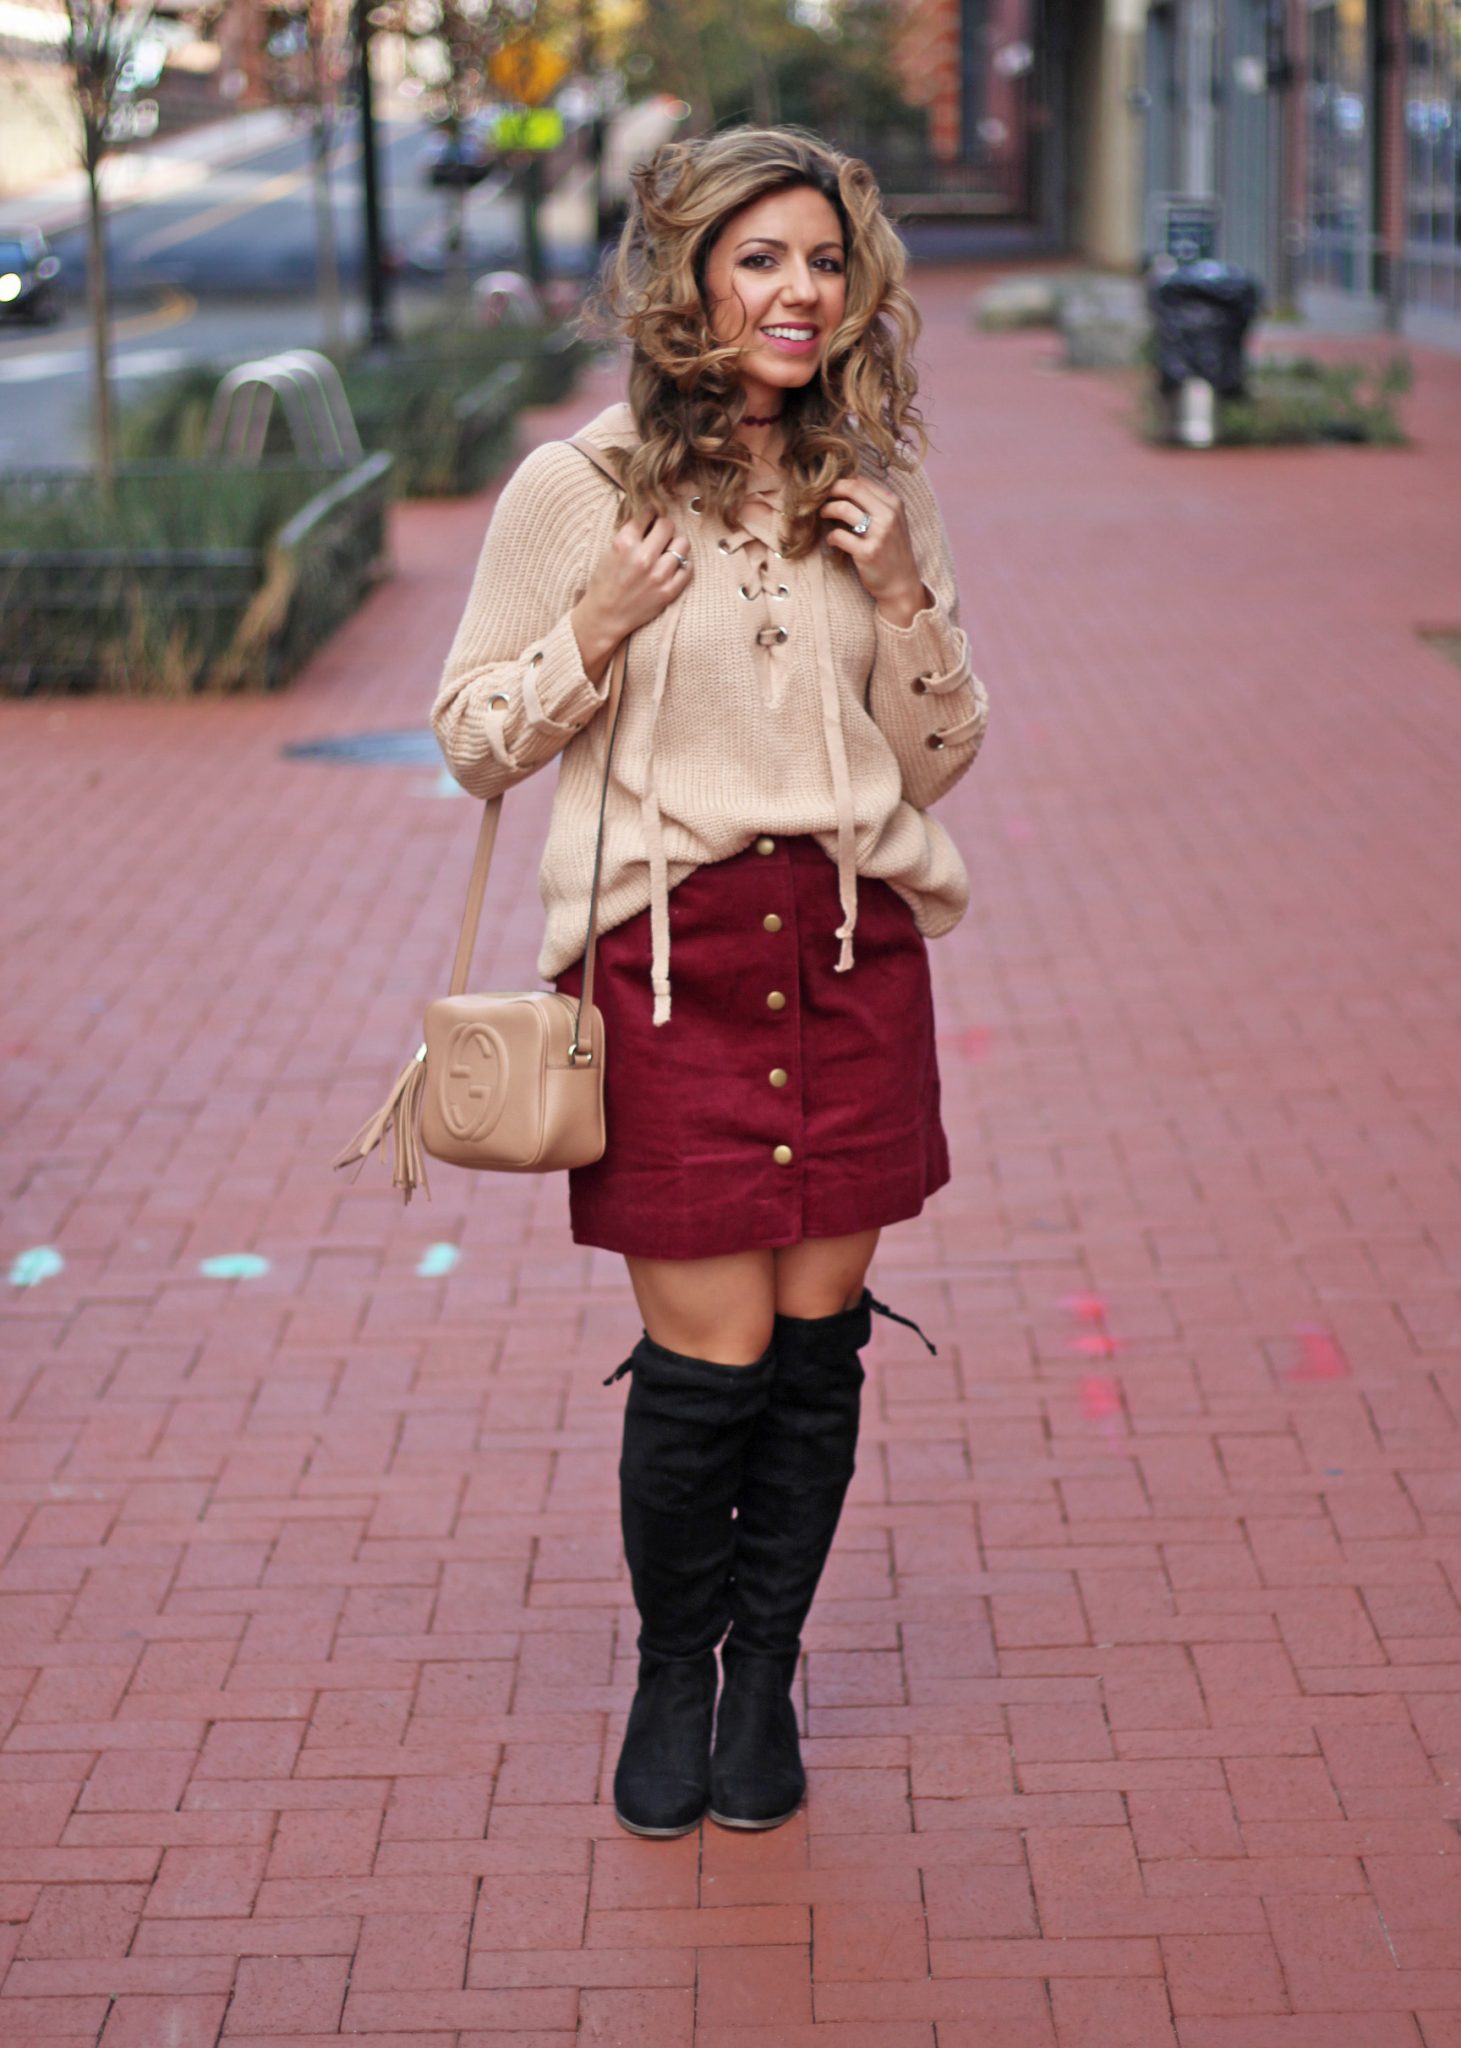 Lace up sweater and a curduroy skirt for the holidays